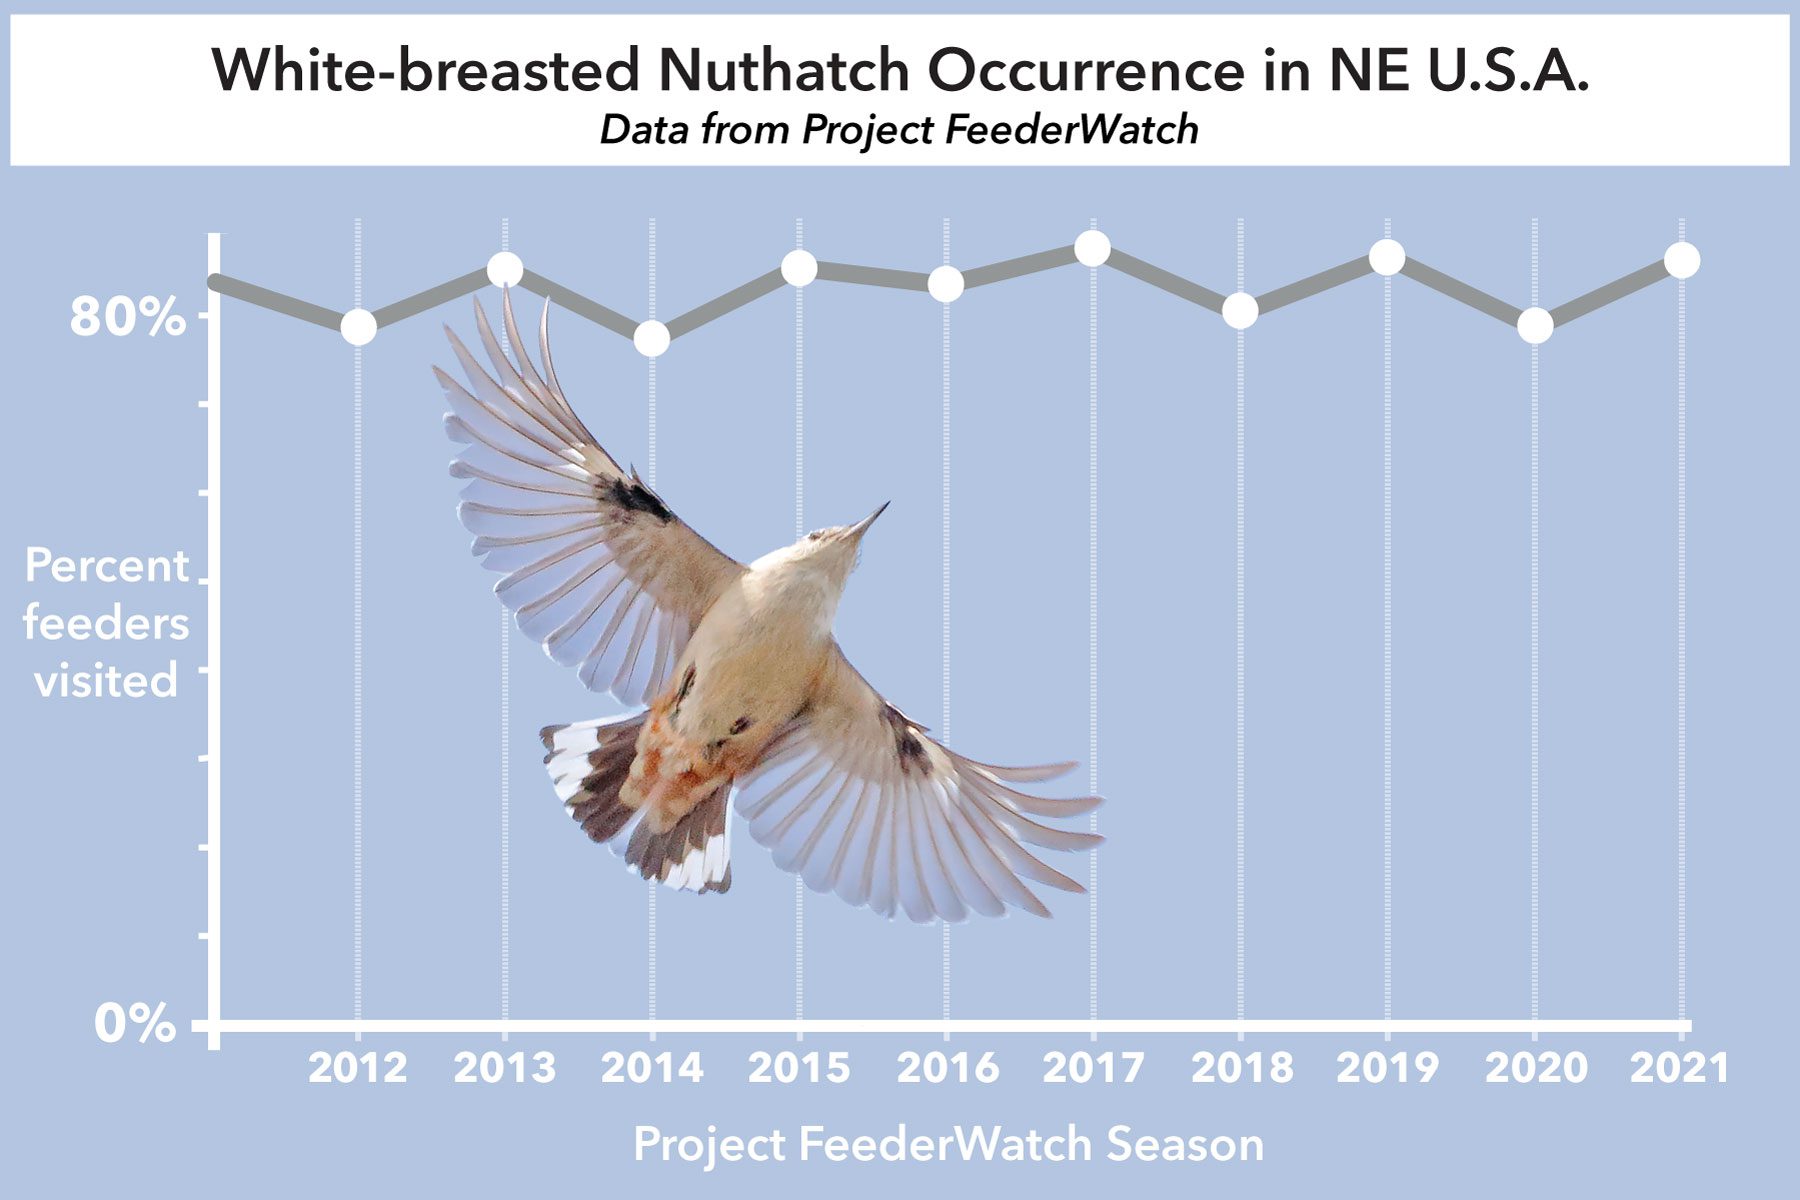 Project FeederWatch data indicates that White-breasted Nuthatch irruptions in the falls of 2018 and 2020 corresponded to an increase in feeder visits during the winters that followed (2019 and 2021). Data source: Project Feederwatch Feeder Bird Trends; graphic by Jillian Ditner; photo of White-breasted Nuthatch by Steve Kolbe/Macaulay Library.